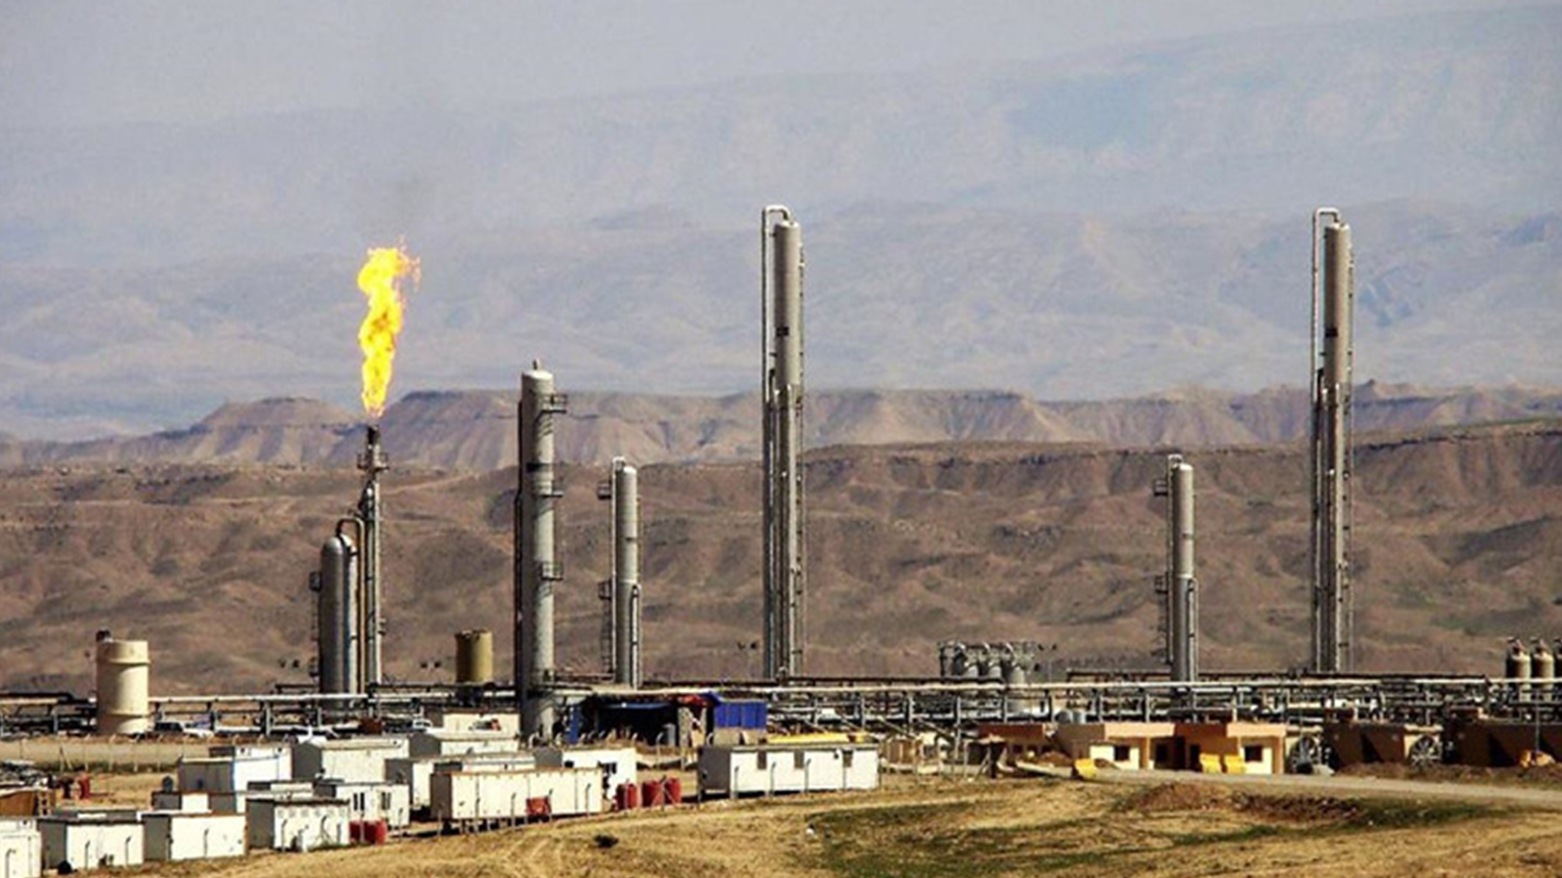 Khor Mor gas field in the Chamchamal District of Sulaimani. (Photo: Handout/Dana Gas)